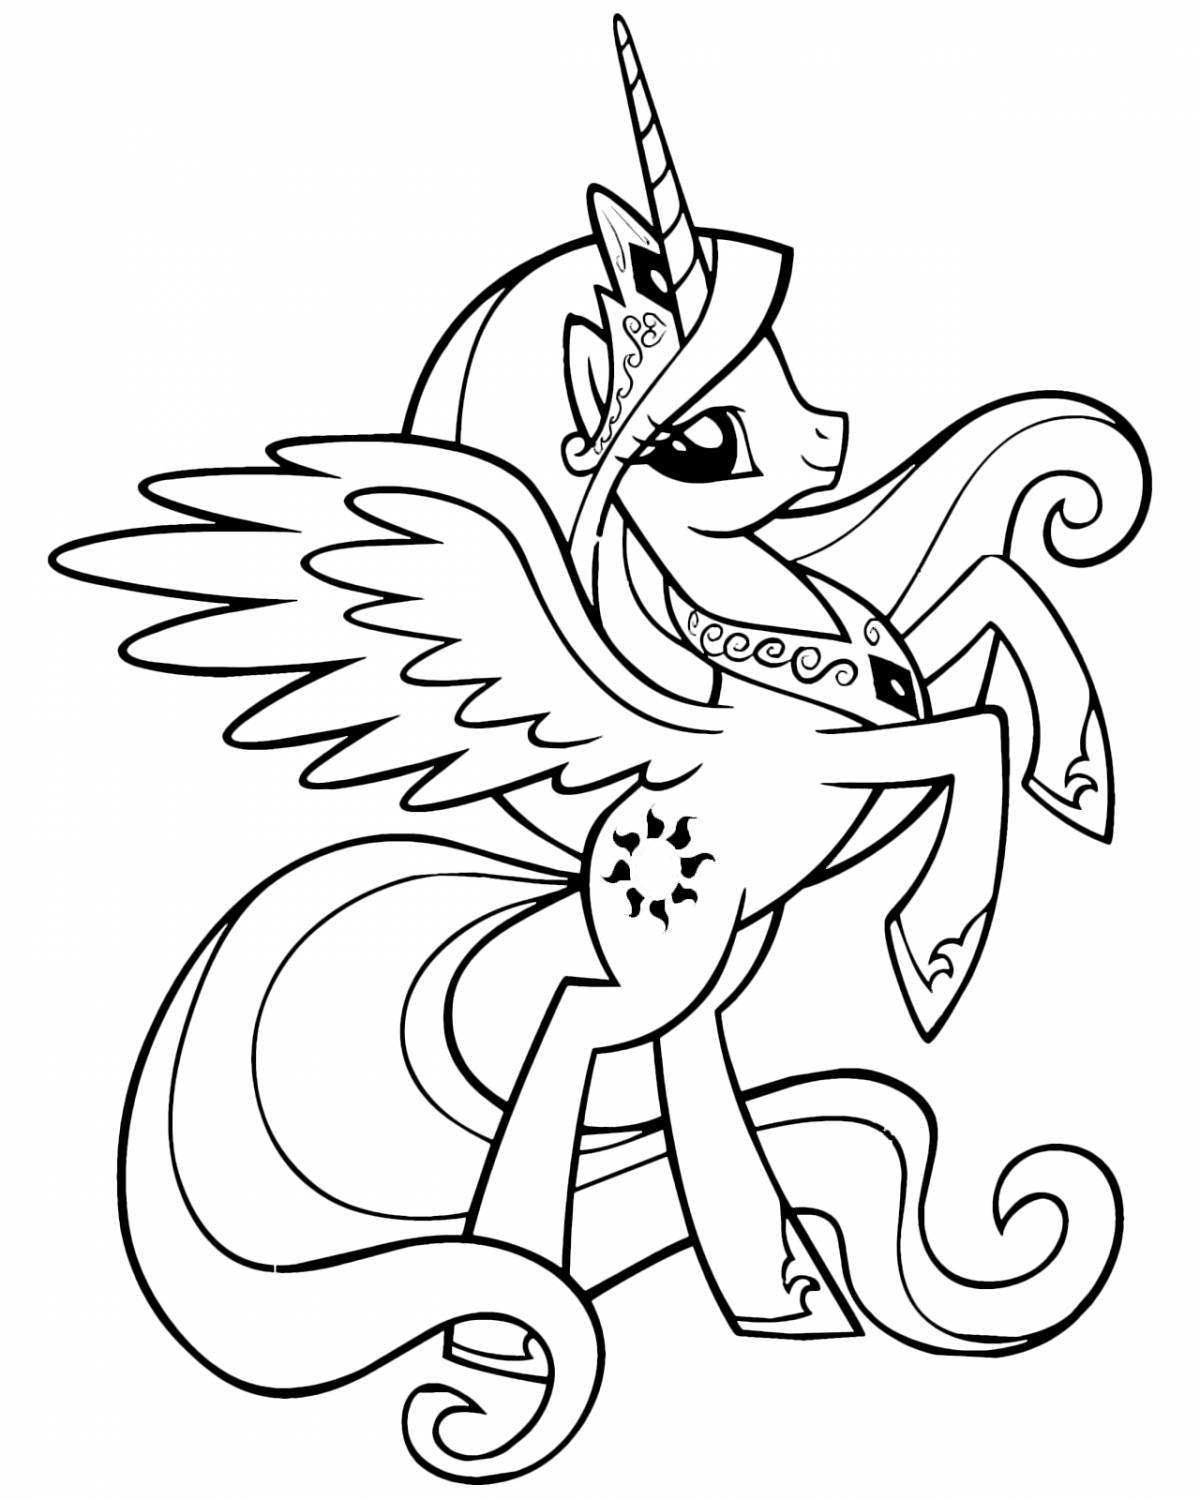 Majestic pony coloring page